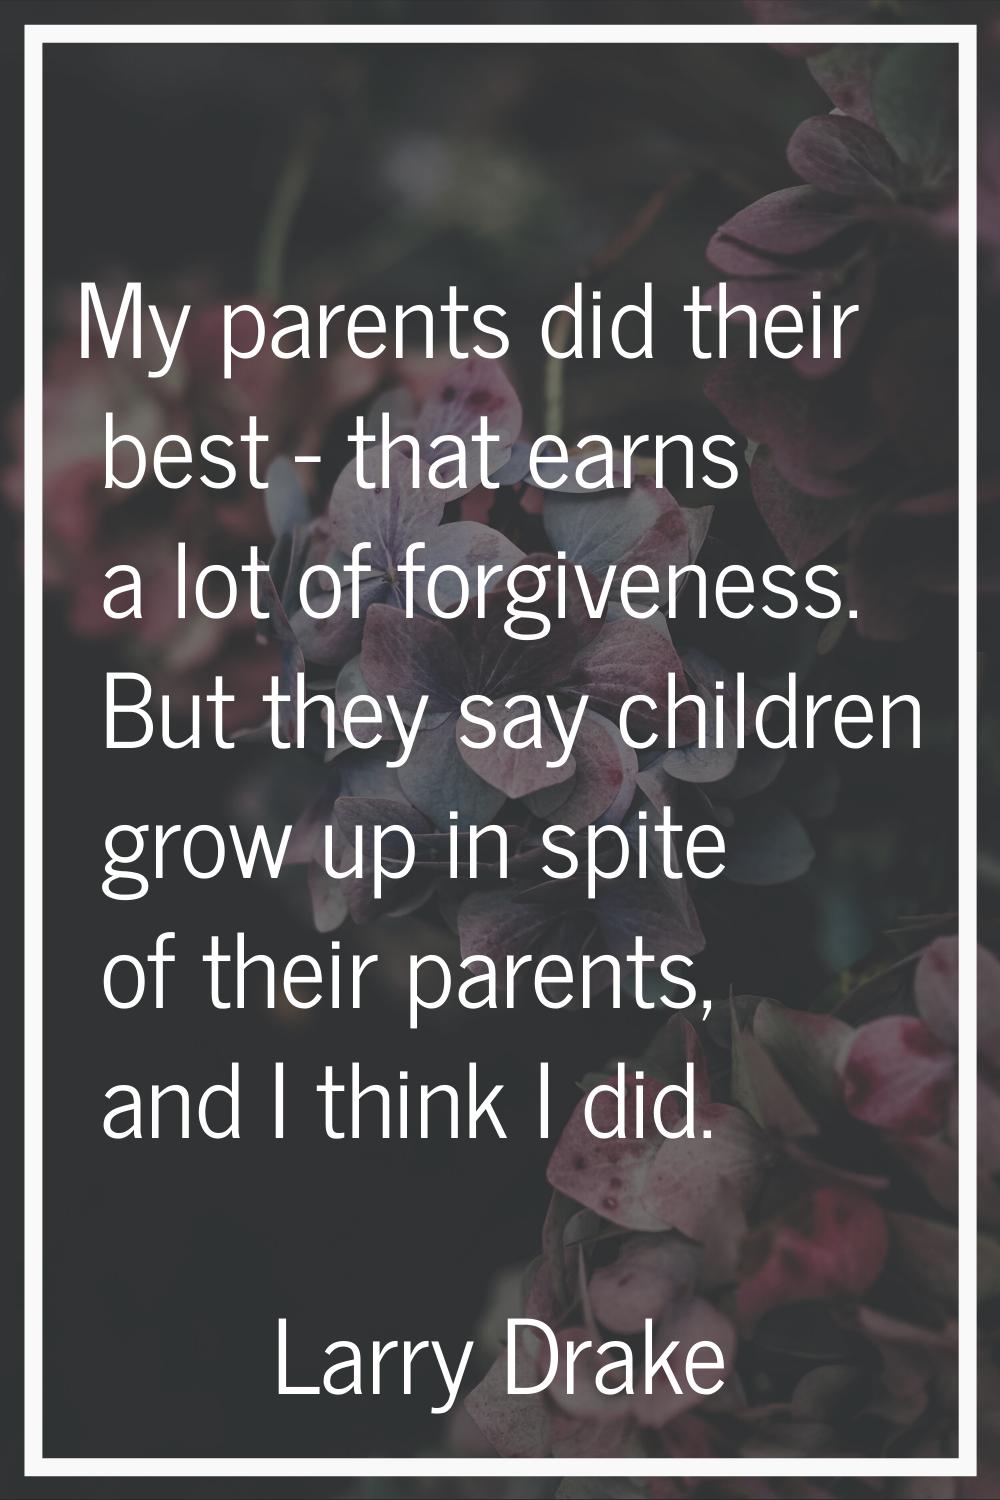 My parents did their best - that earns a lot of forgiveness. But they say children grow up in spite